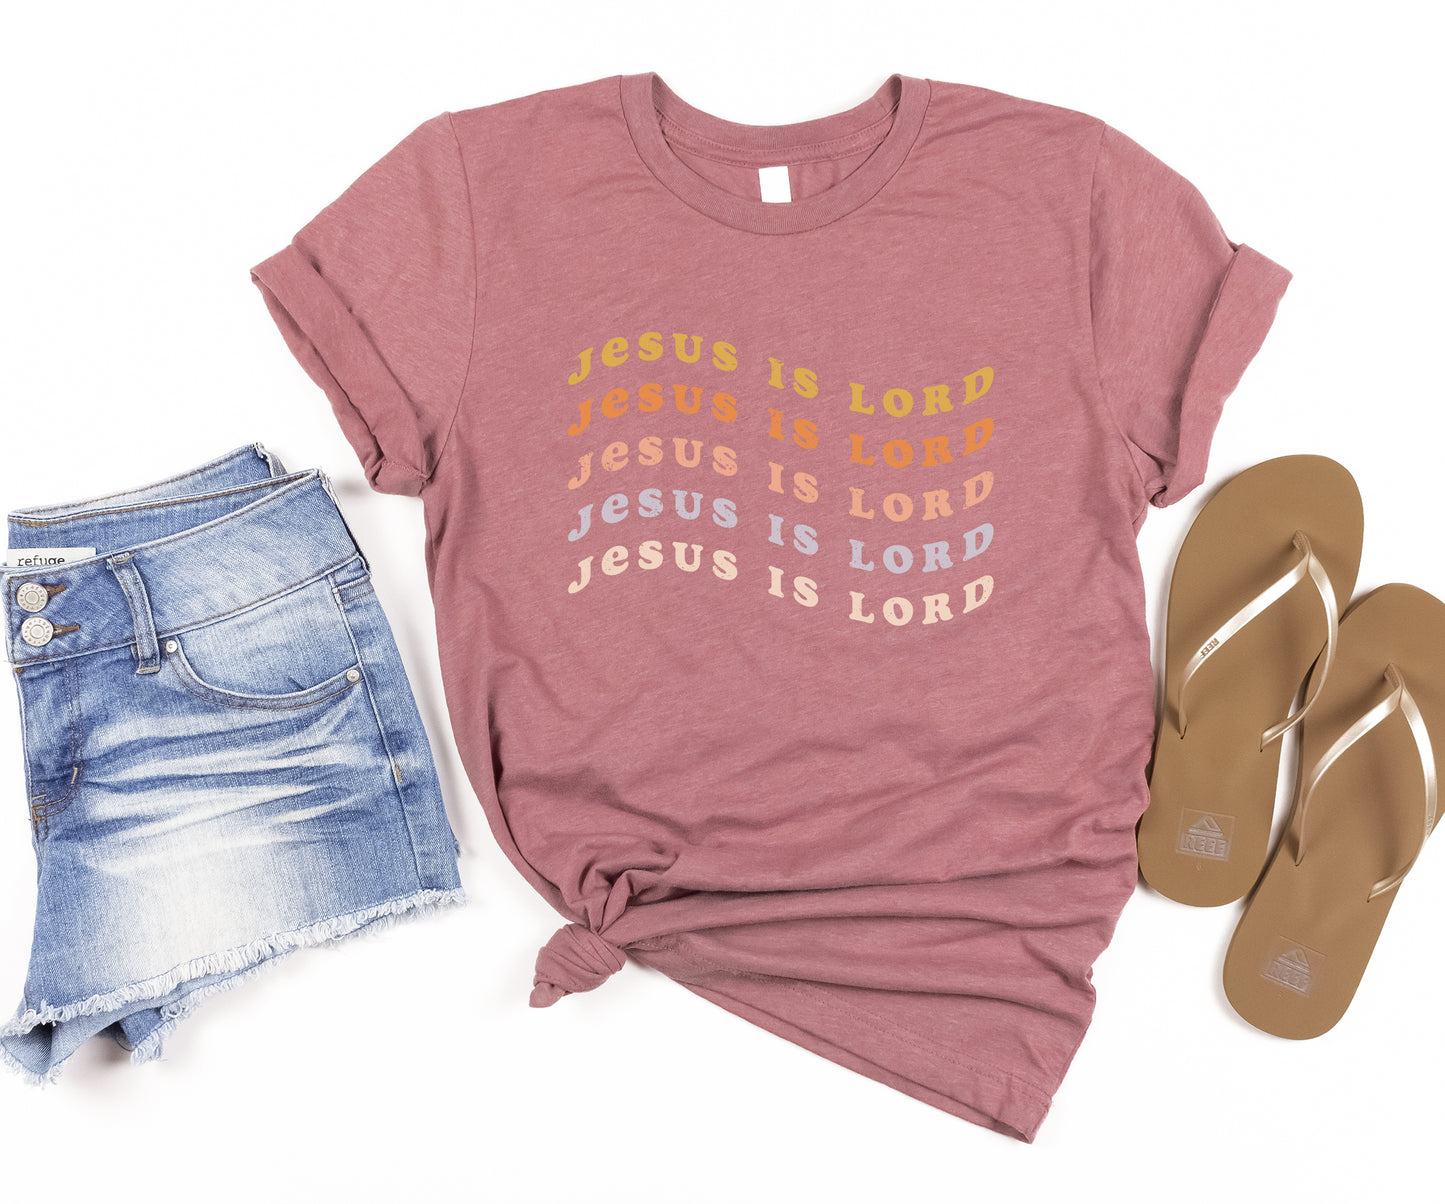 Jesus is Lord T-shirt